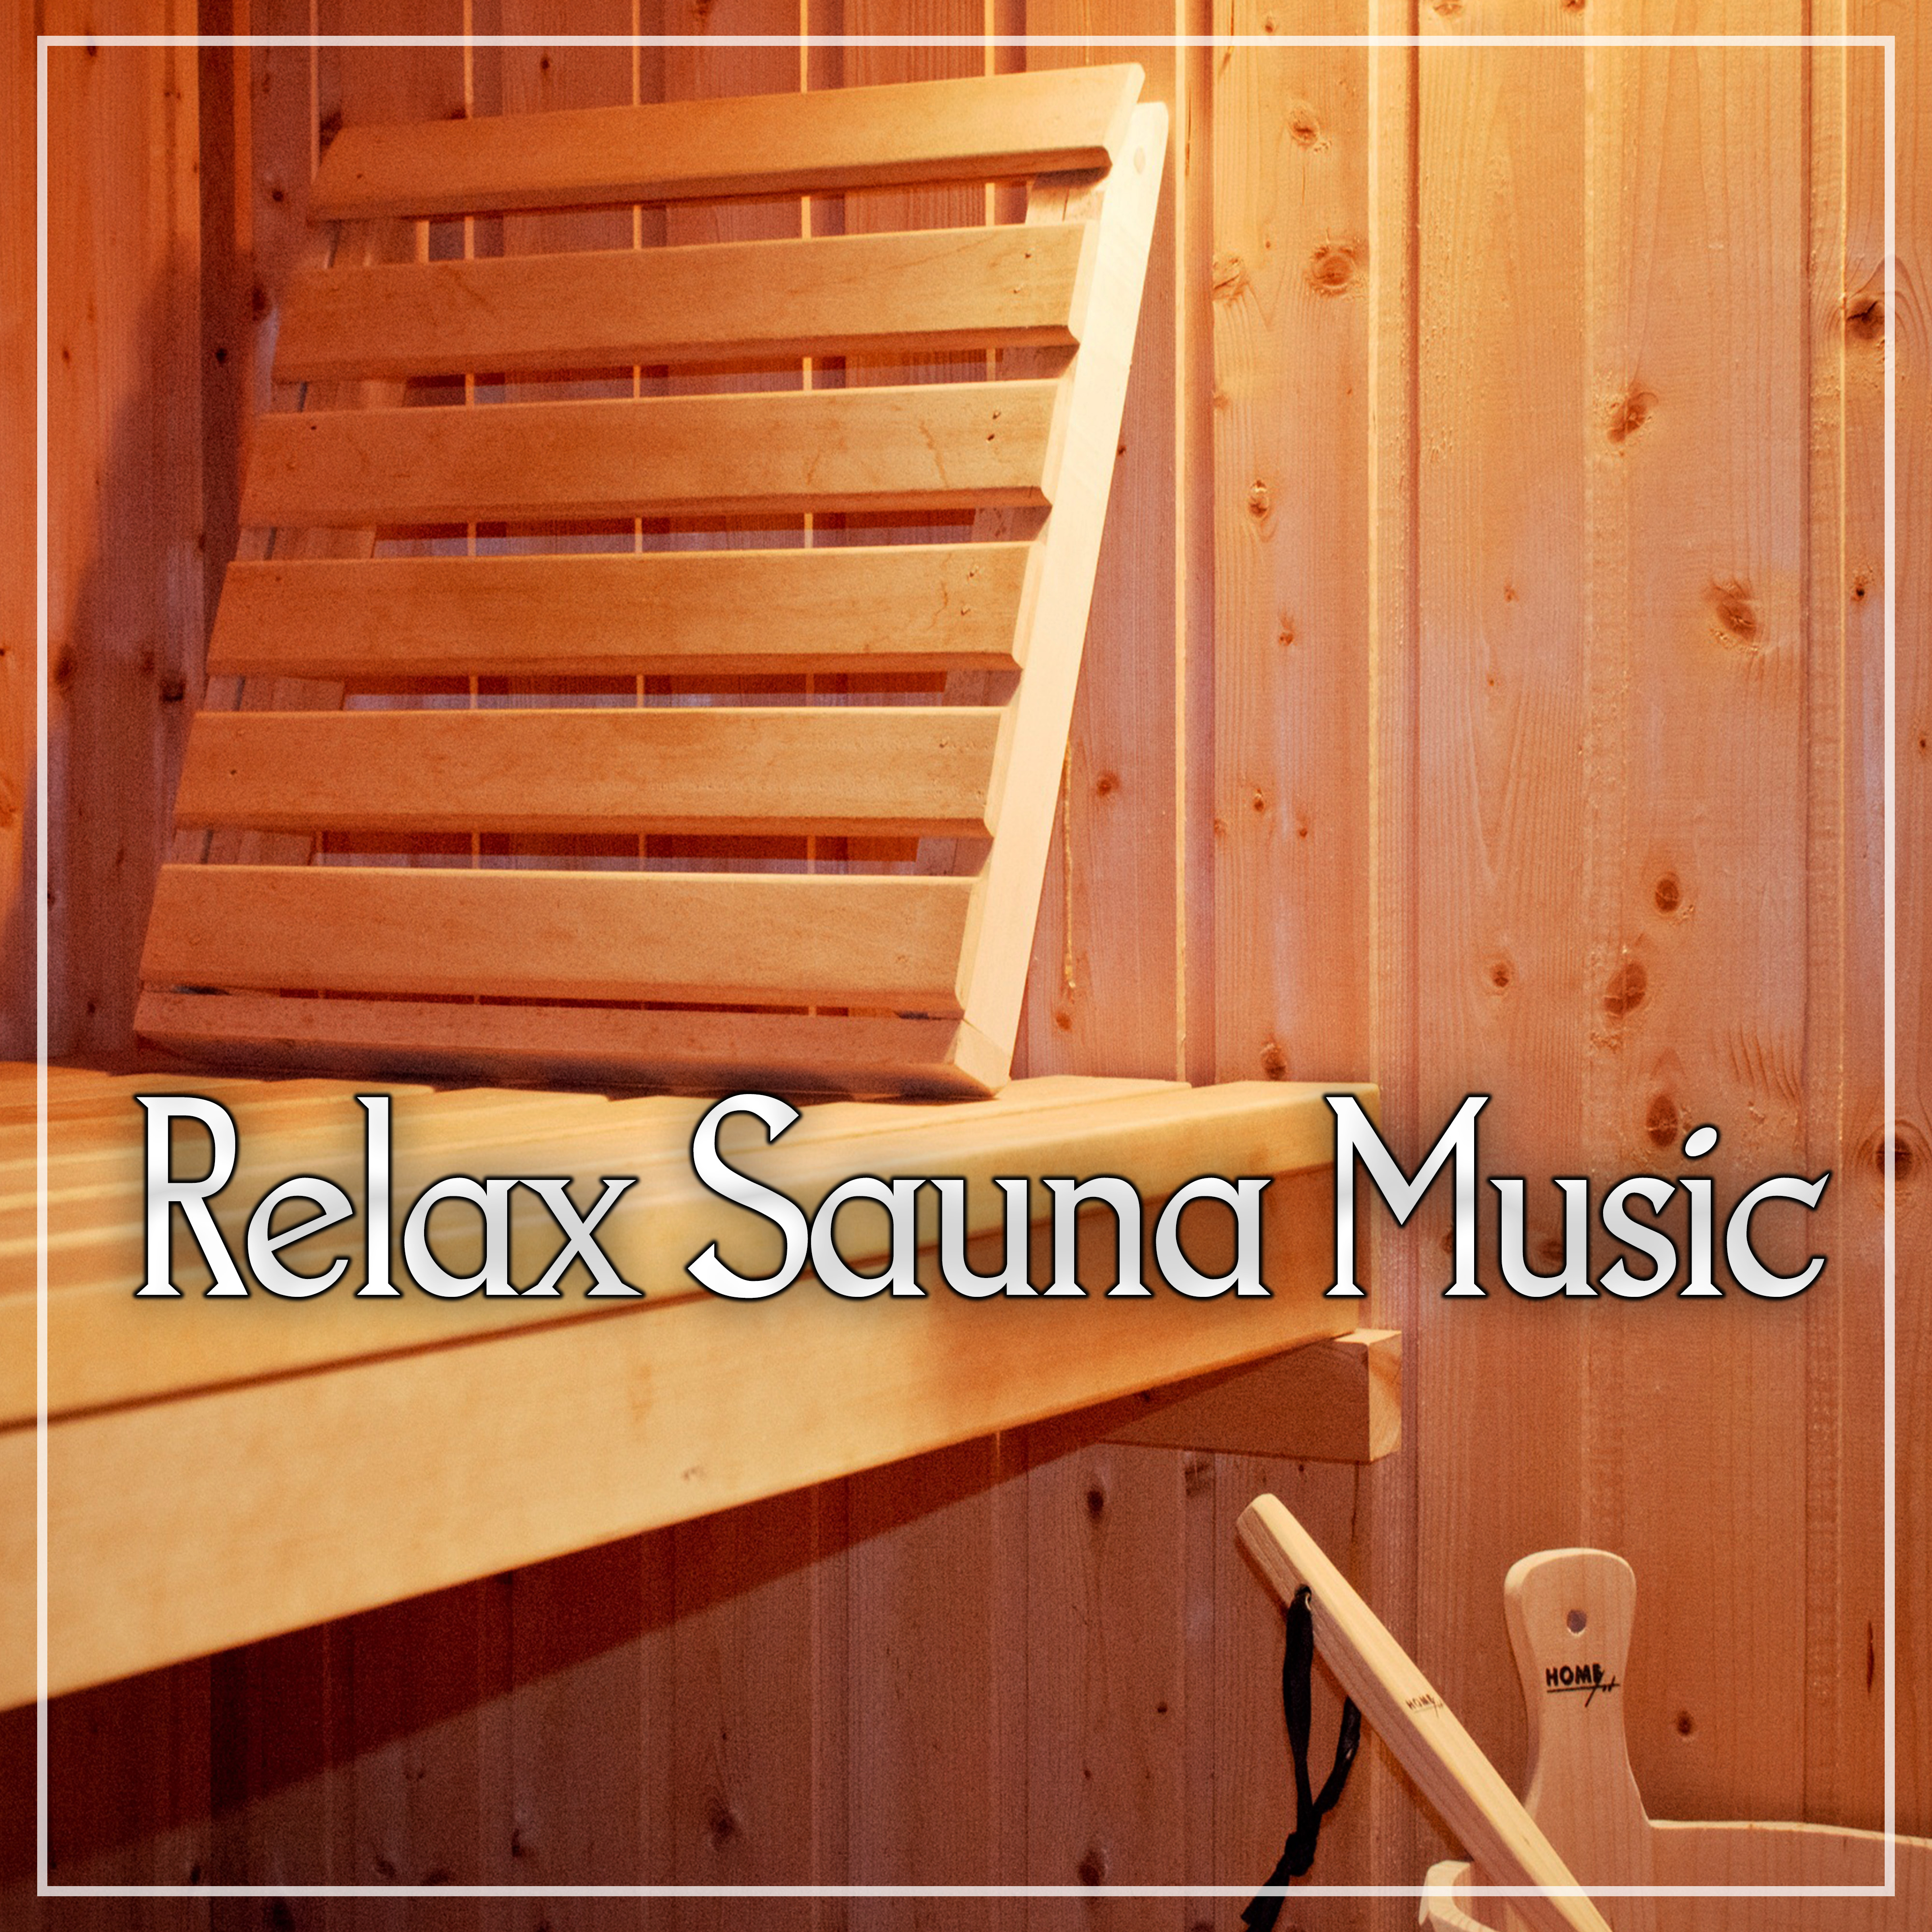 Relax Sauna Music  New Age Music for Sauna  SPA, Relaxation Sounds of Nature for Beauty Treatments, Relaxation Music, Zen Music